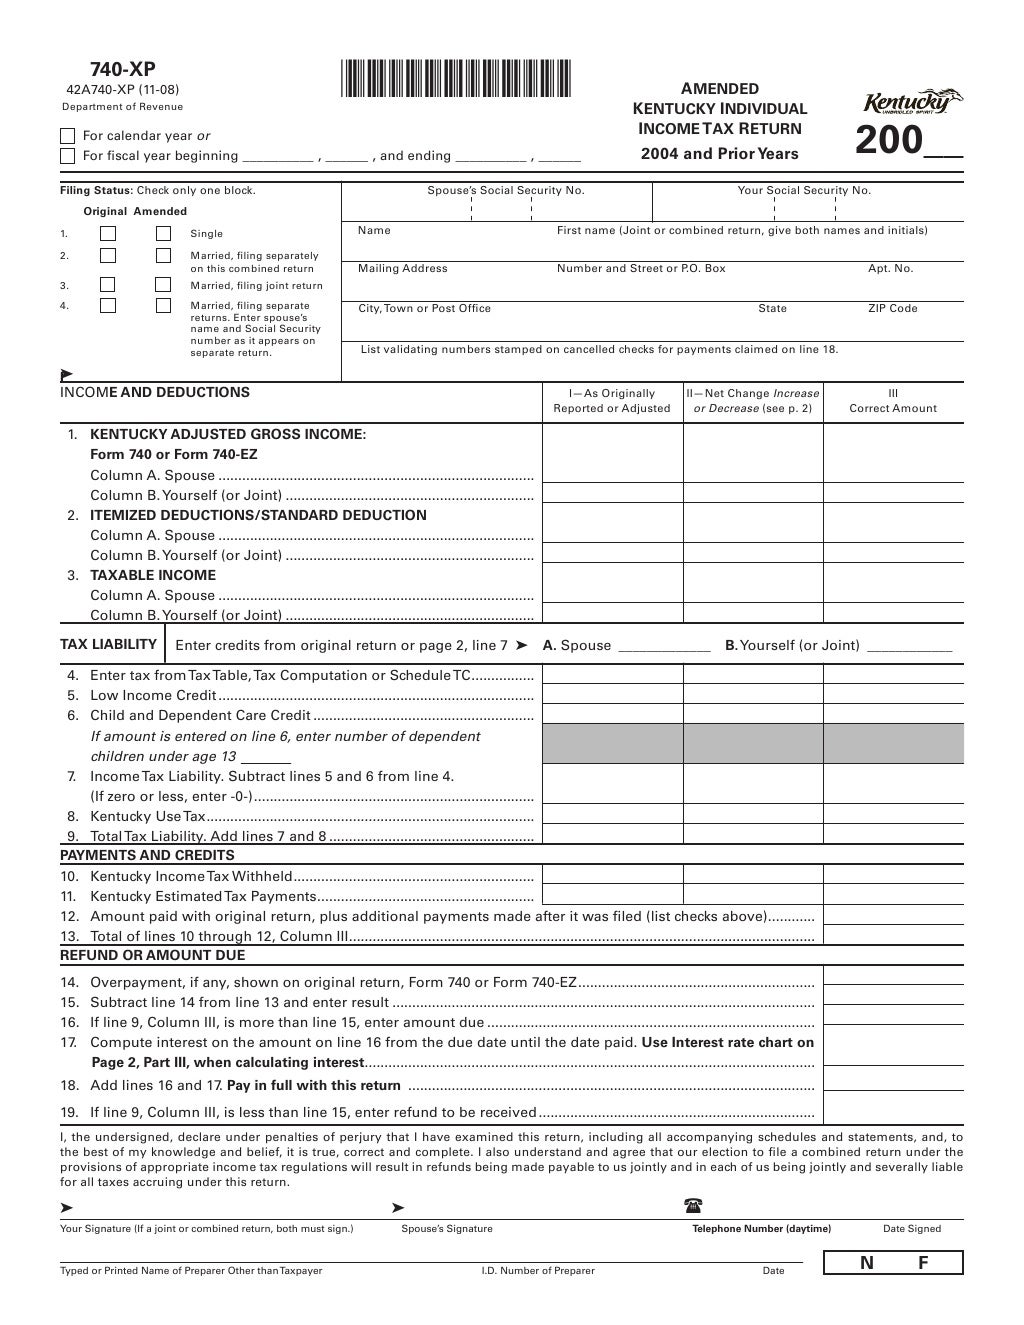 740-xp-amended-kentucky-individual-income-tax-return-2004-and-prior